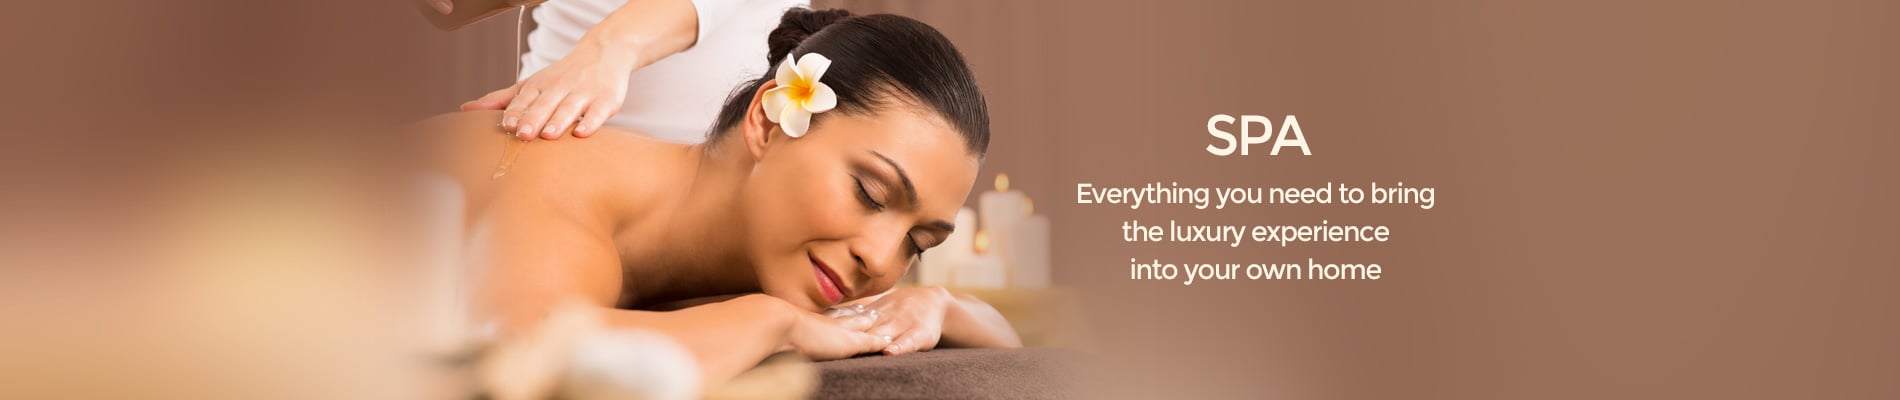 Spa - Everything you need so bring the luxury experience into your own home